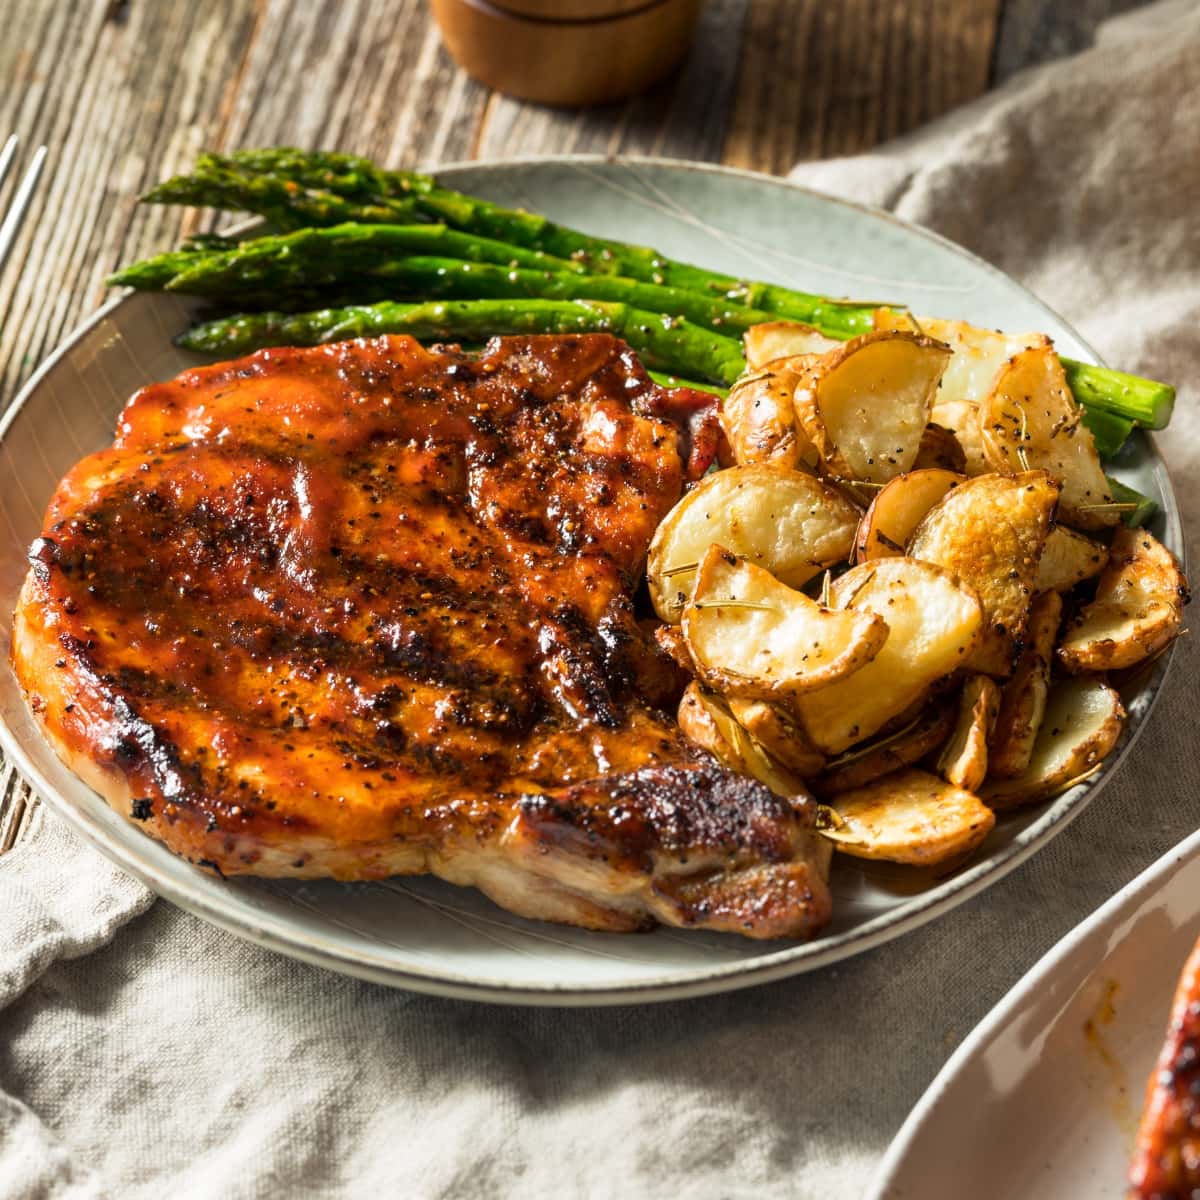 Honey Garlic Pork Chops Served on a Plate with Roasted Potatoes and Asparagus